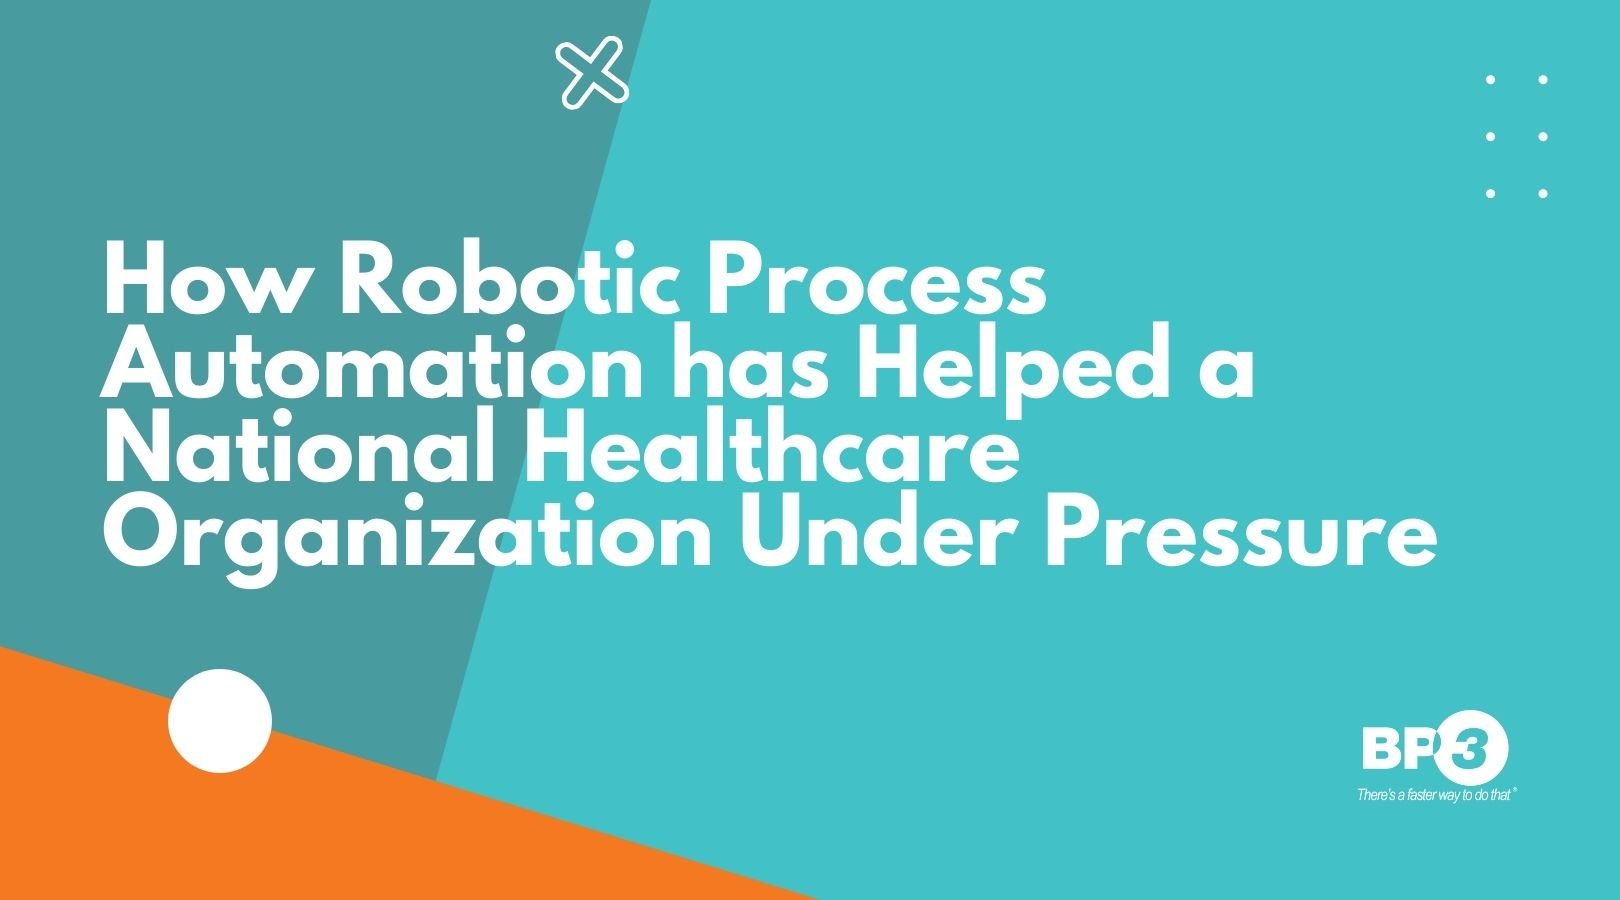 How Robotic Process Automation has Helped a National Healthcare Organization Under Pressure